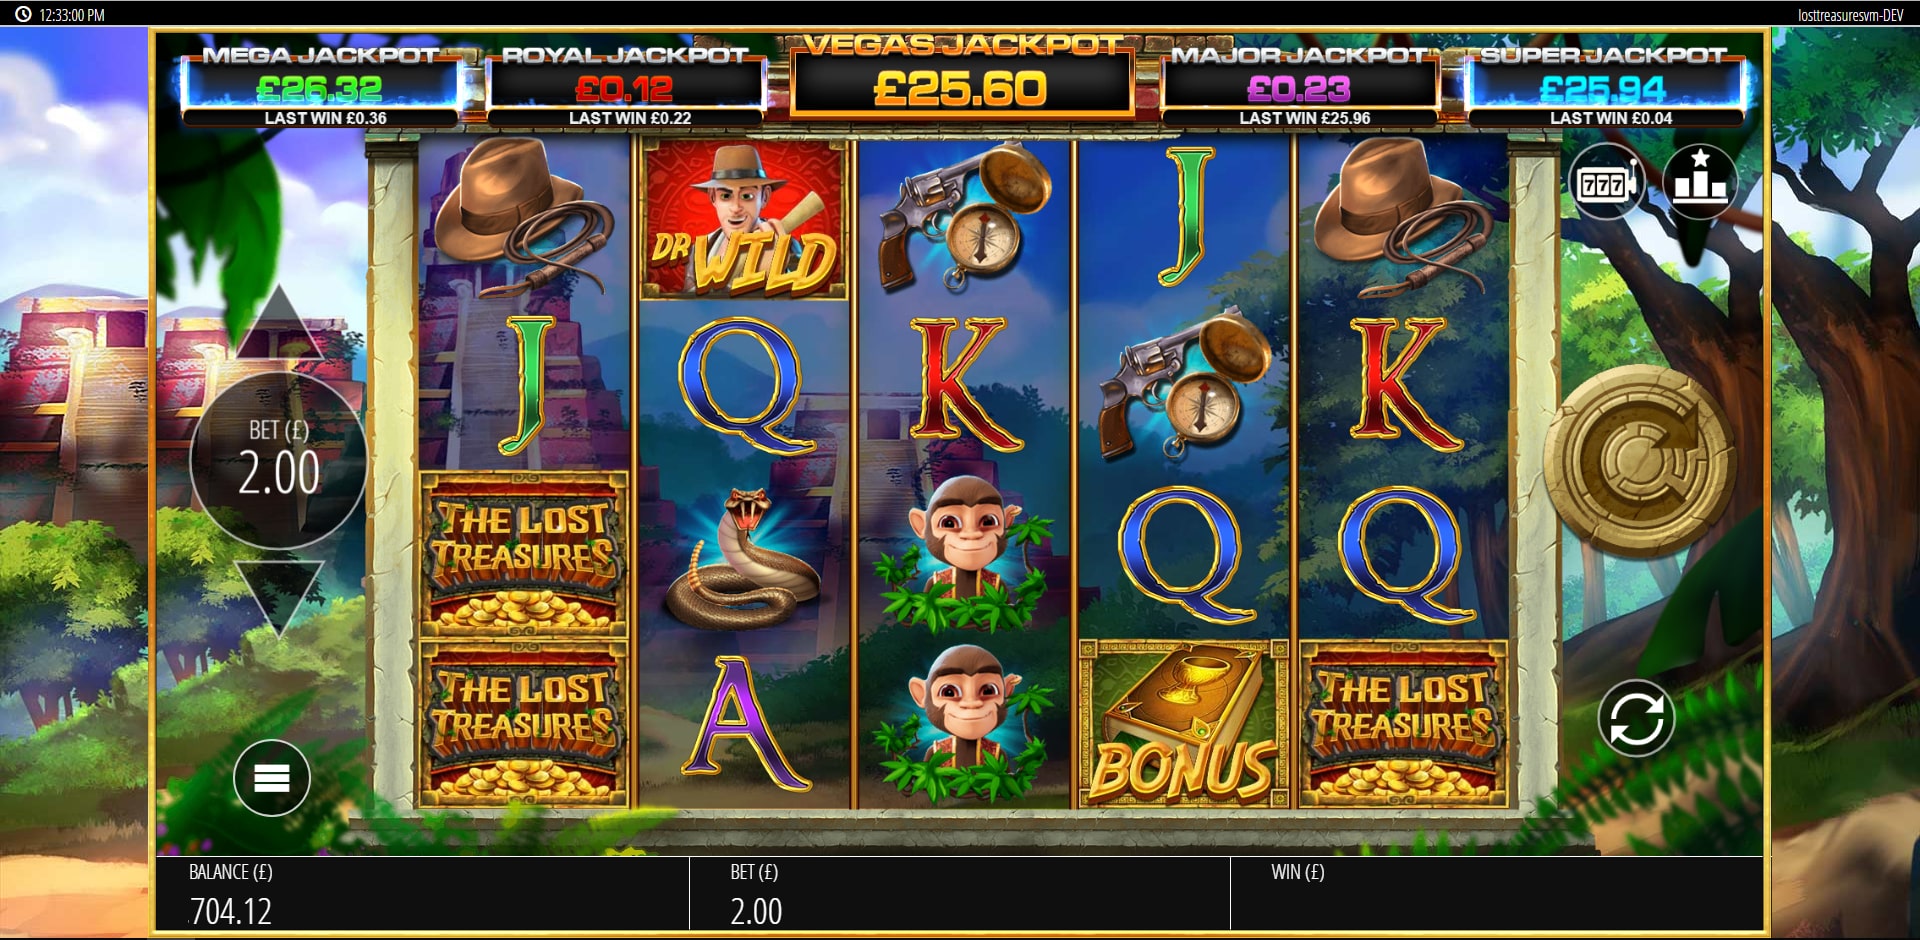 The Lost Treasures Free Spins